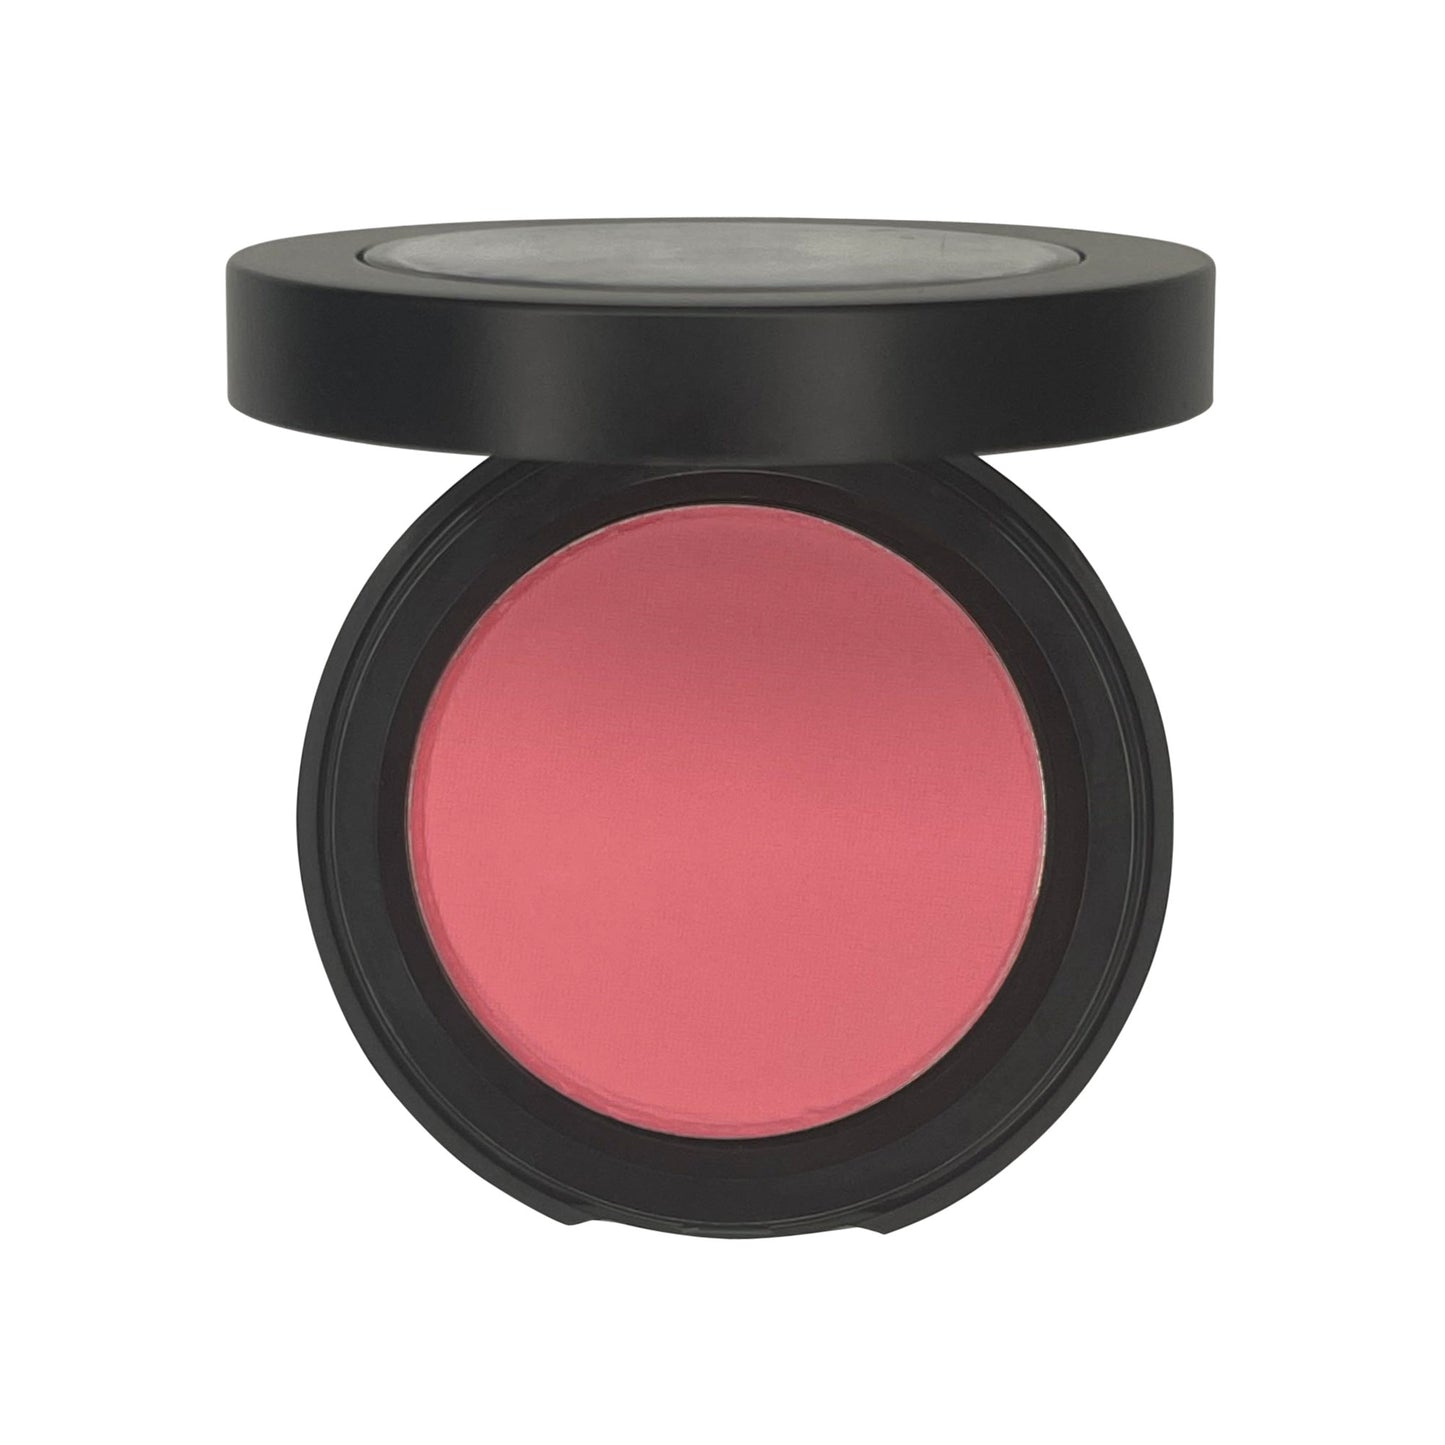 Whether you're getting ready for a special occasion or just want a touch of color, this versatile blush has got you covered. Plus, our triple-milled powder shows our commitment to clean and safe beauty. Treat your skin to the best with our Cruisin Organics Lotus Single Pan Blush.